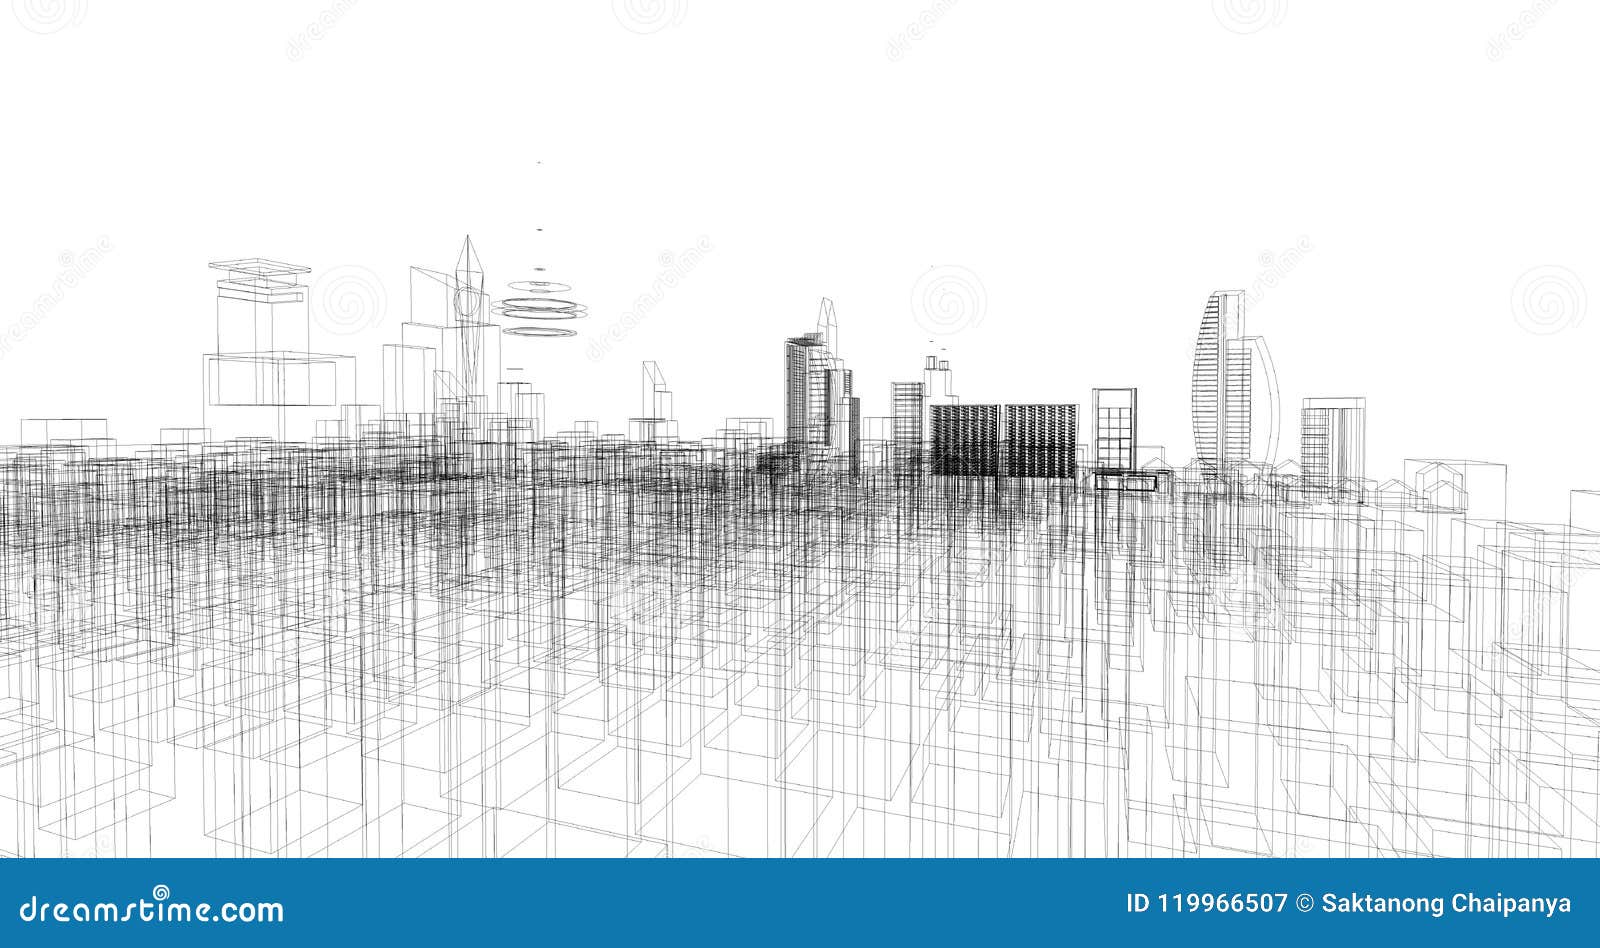 abstract architectural drawing sketch,city scape